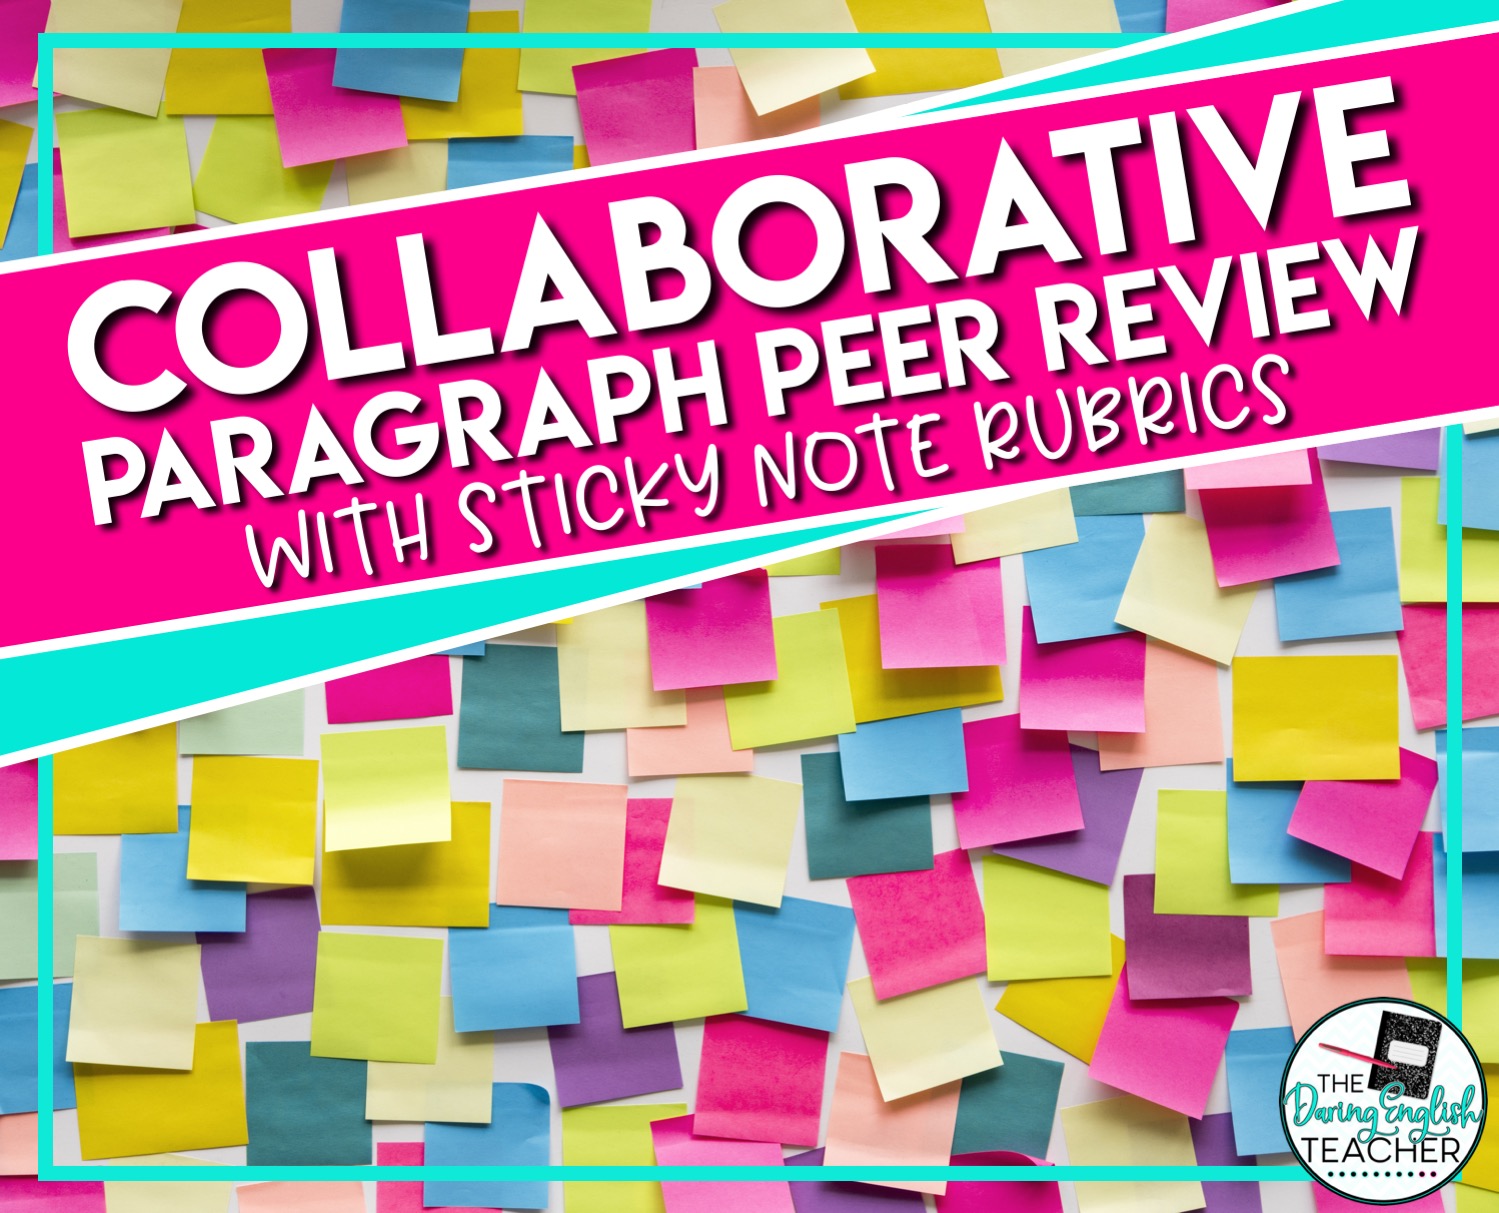 Collaborative Paragraph Peer Review with Sticky Note Rubrics